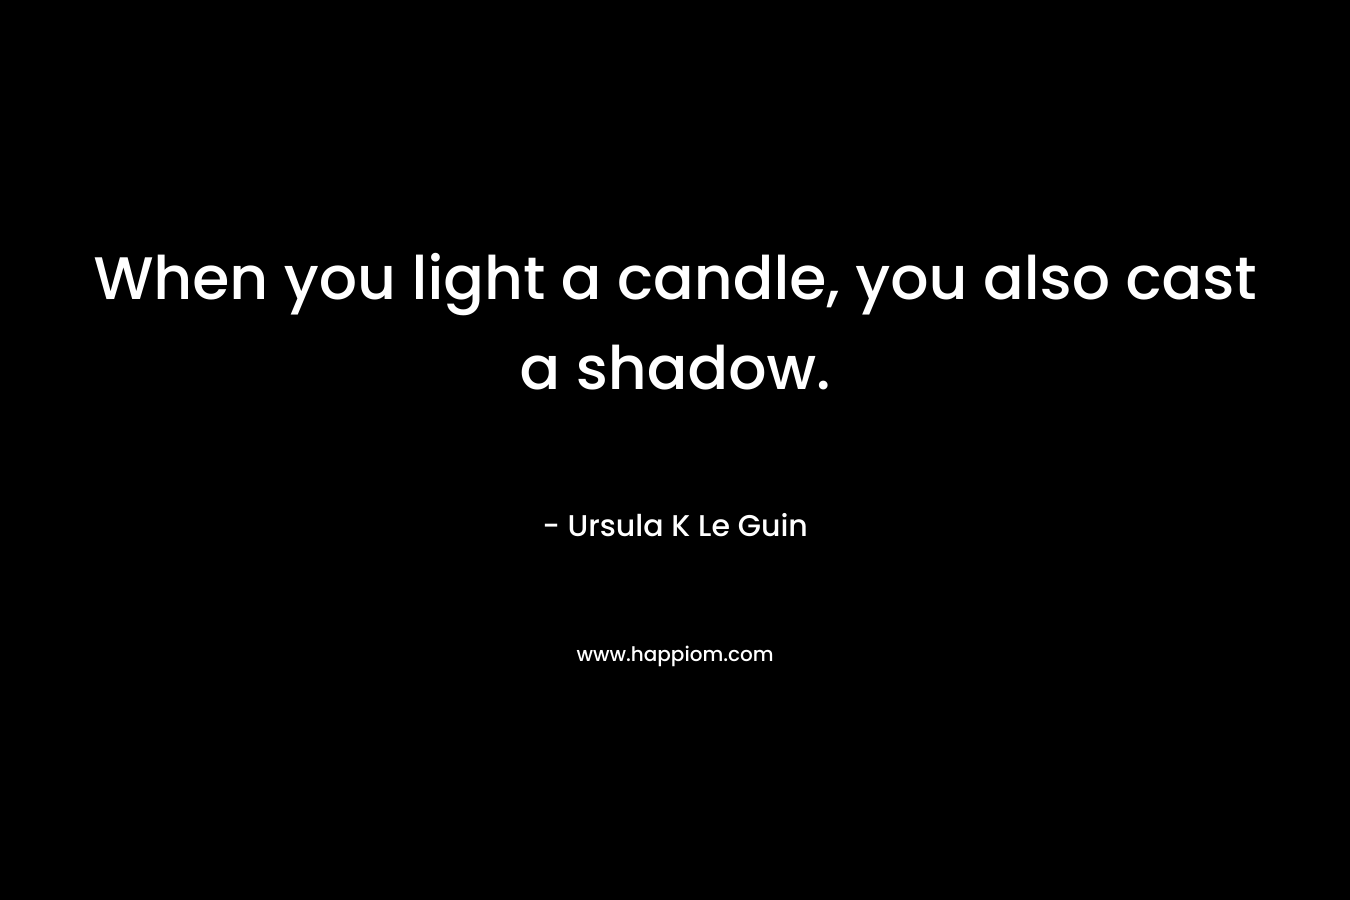 When you light a candle, you also cast a shadow.